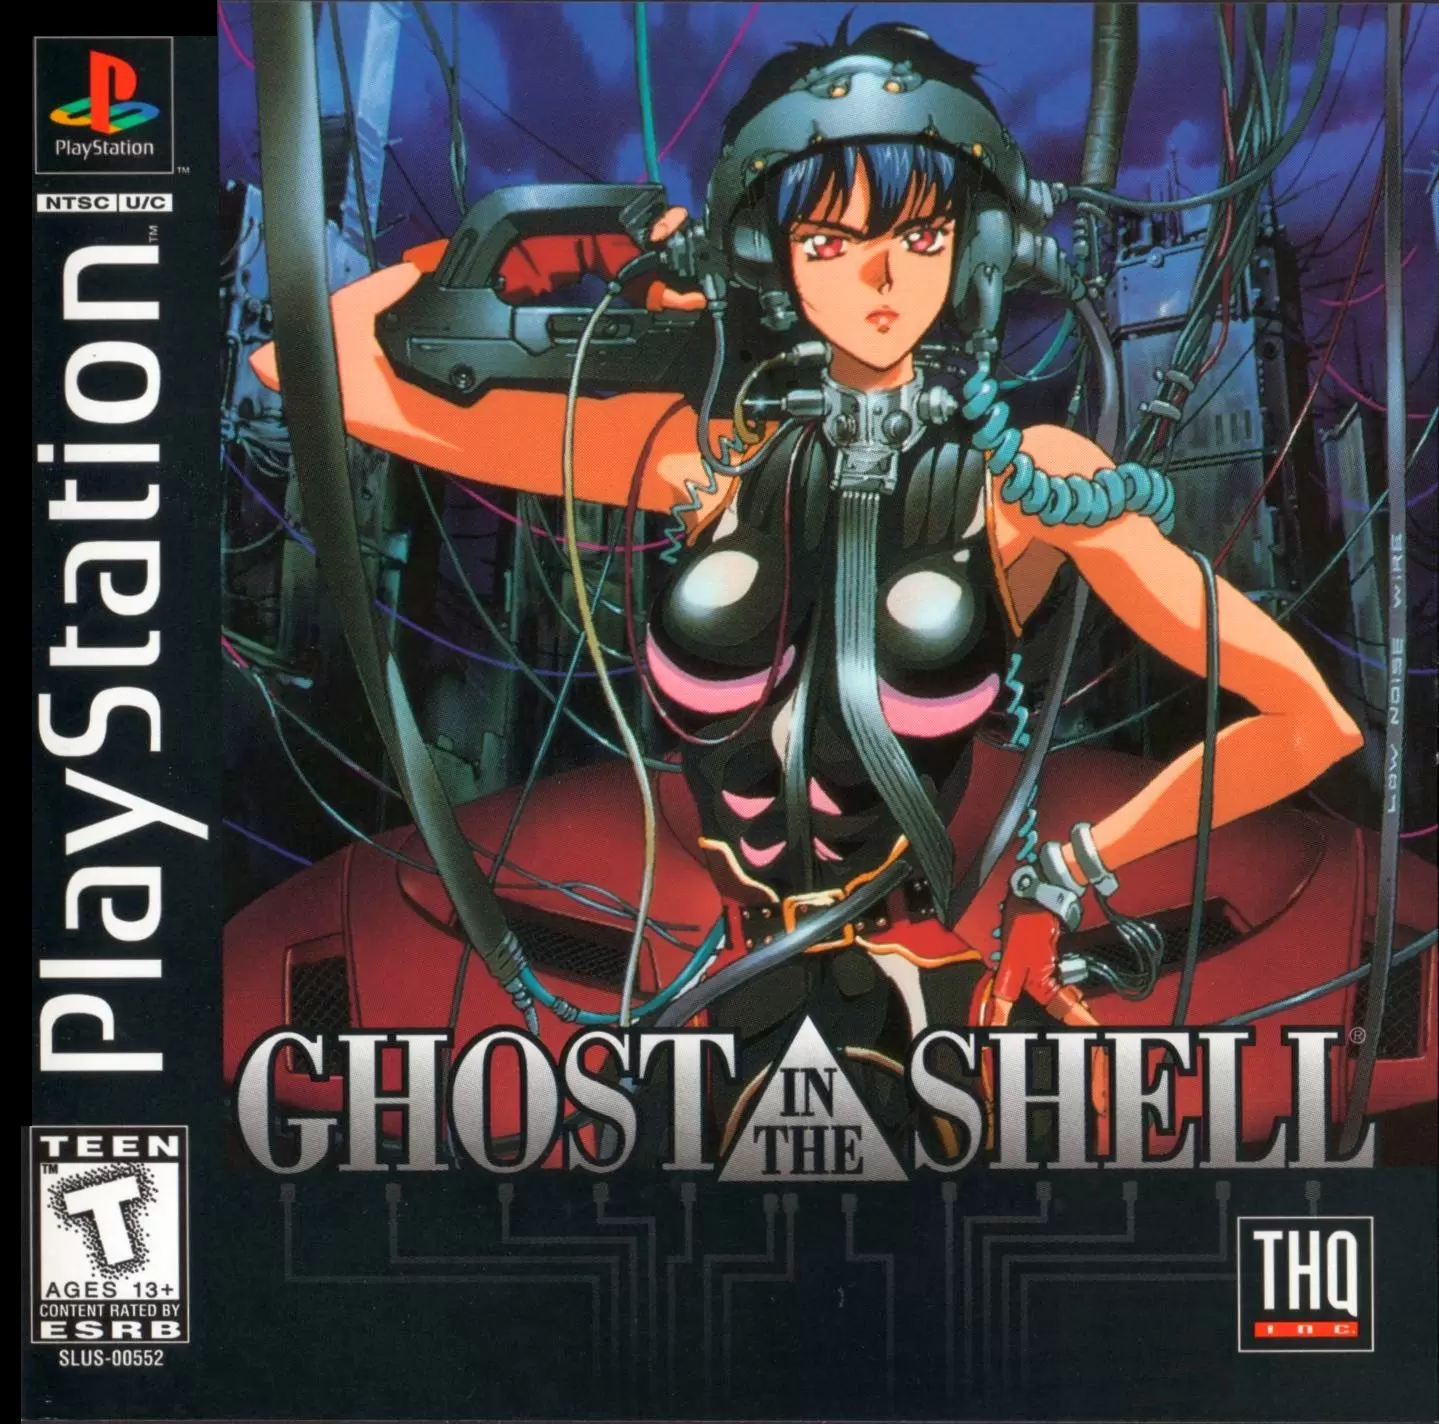 Playstation games - Ghost in the Shell